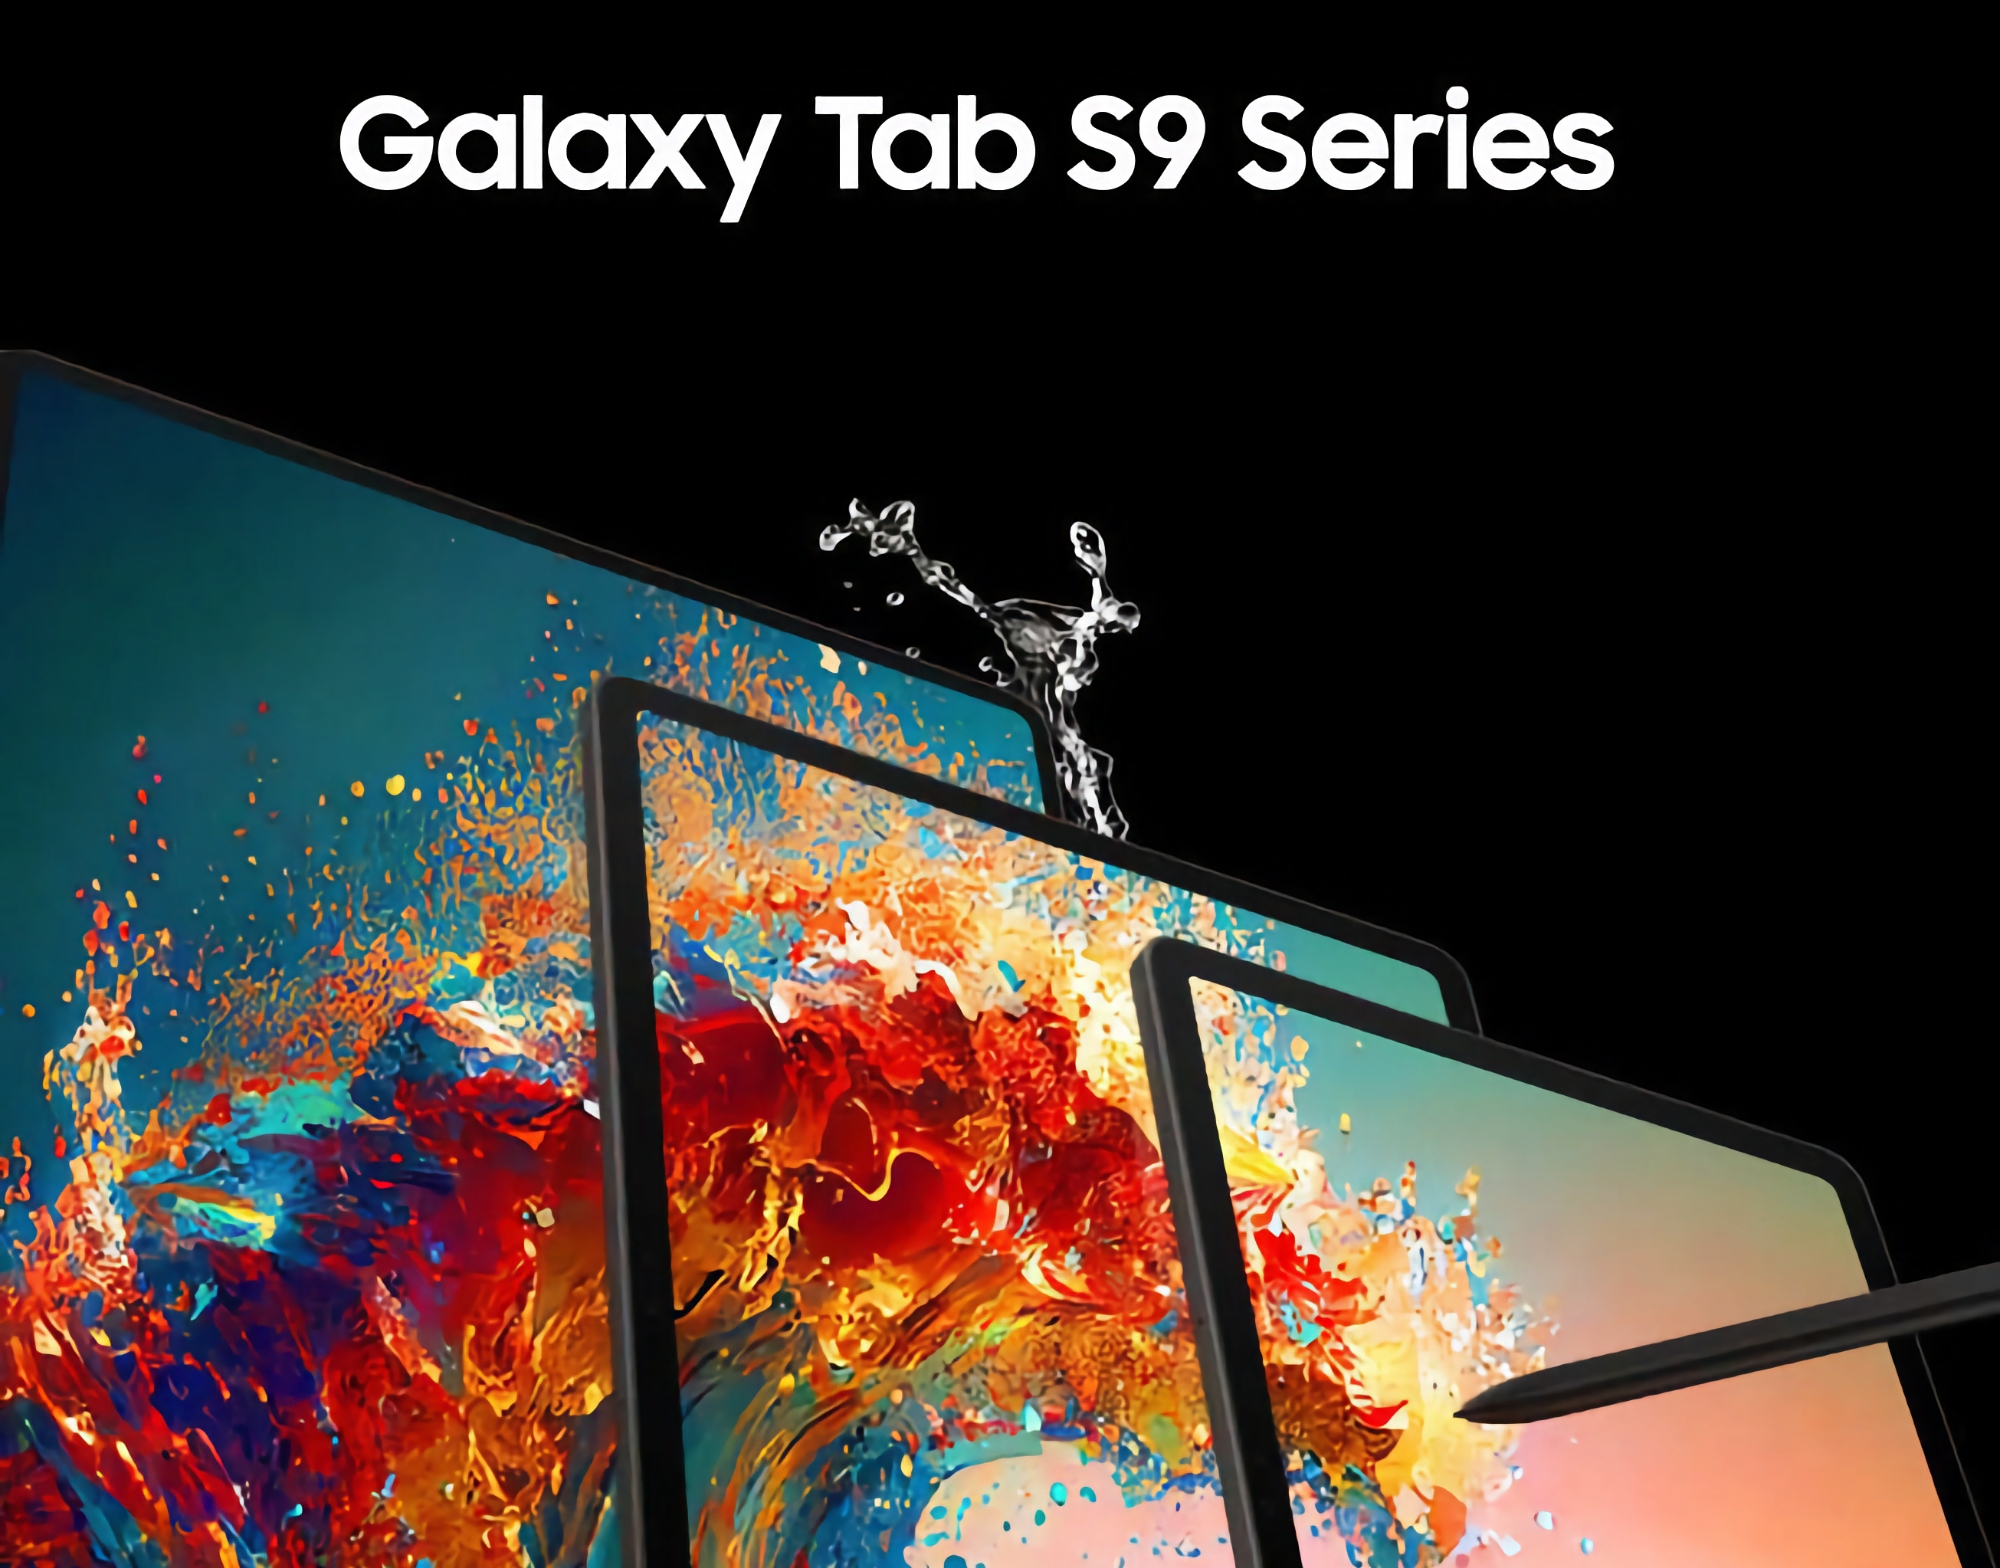 Samsung has released the One UI 6.1 update for the Galaxy Tab S9, Galaxy Tab S9+ and Galaxy Tab S9 Ultra